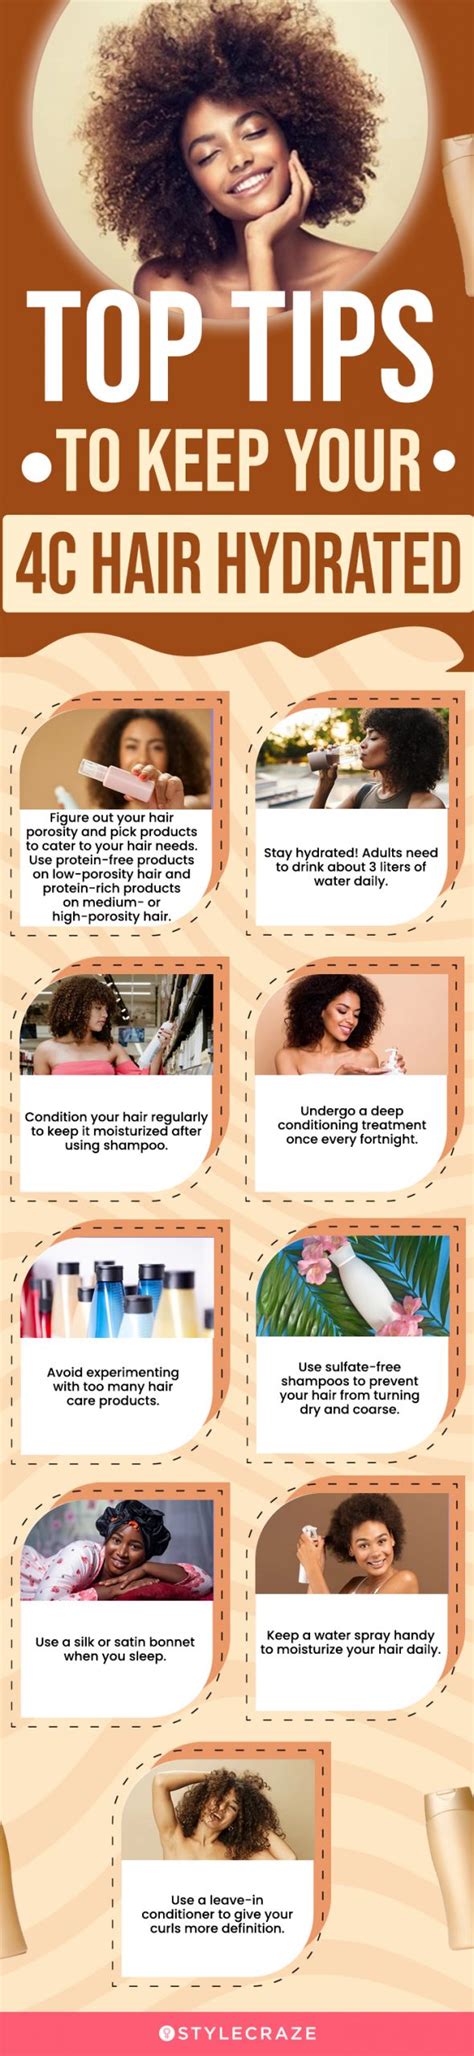 10 Effective Ways To Keep 4c Hair Moisturized And More